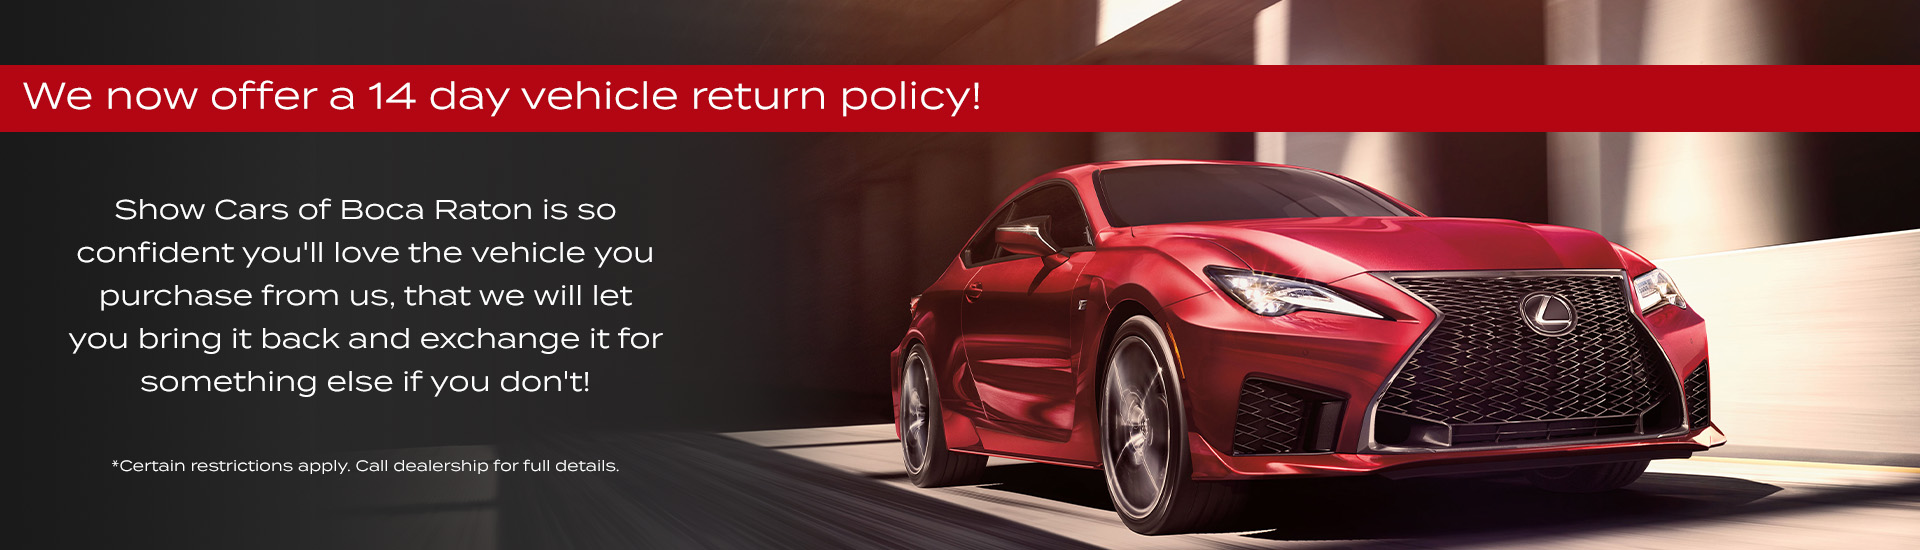 ShowCars-VehicleReturnPolicy-Banner-1920x550